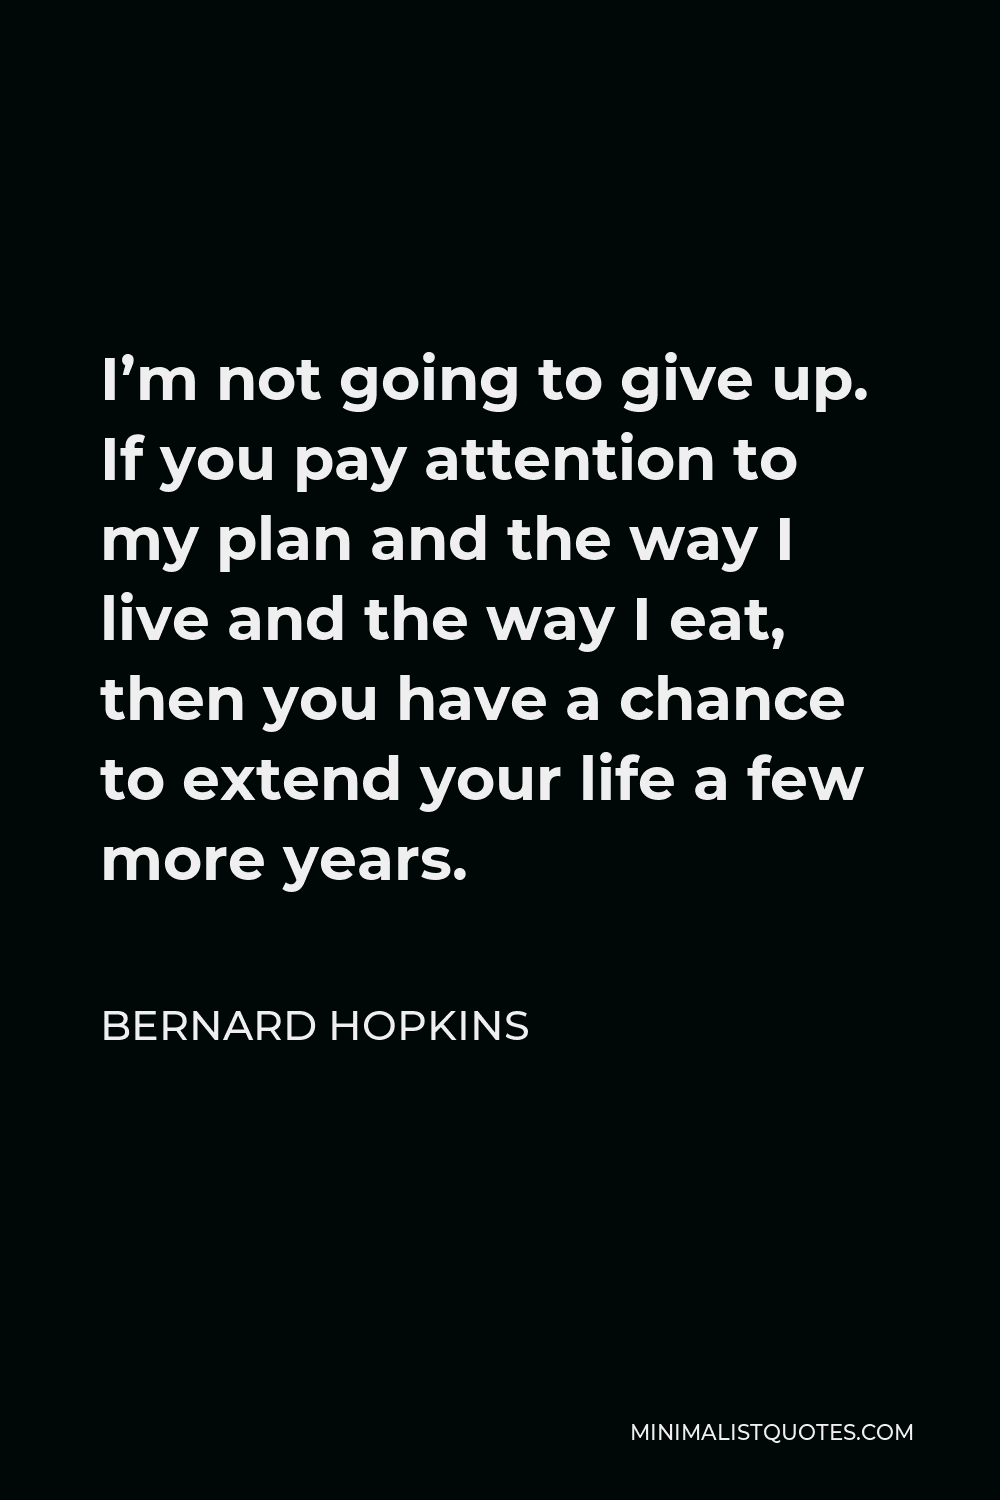 Bernard Hopkins Quote - I’m not going to give up. If you pay attention to my plan and the way I live and the way I eat, then you have a chance to extend your life a few more years.